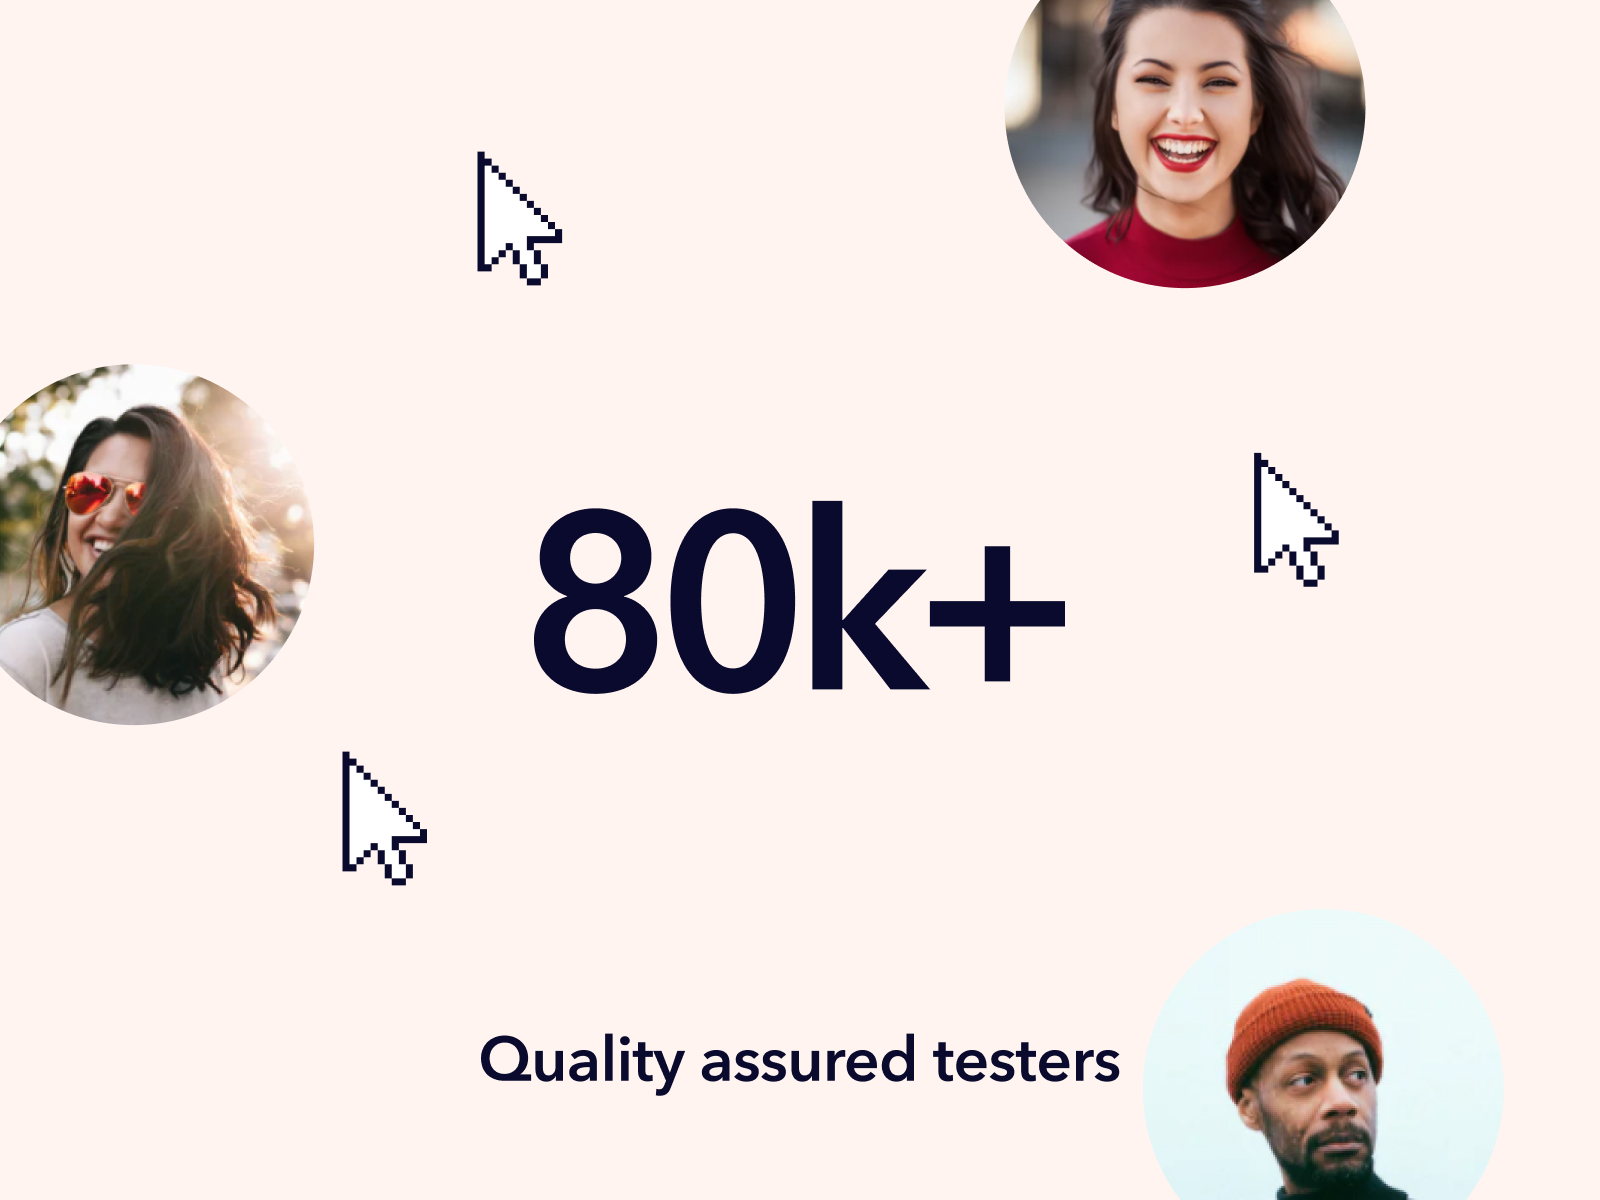 More than 85k+ Quality Assured Testers